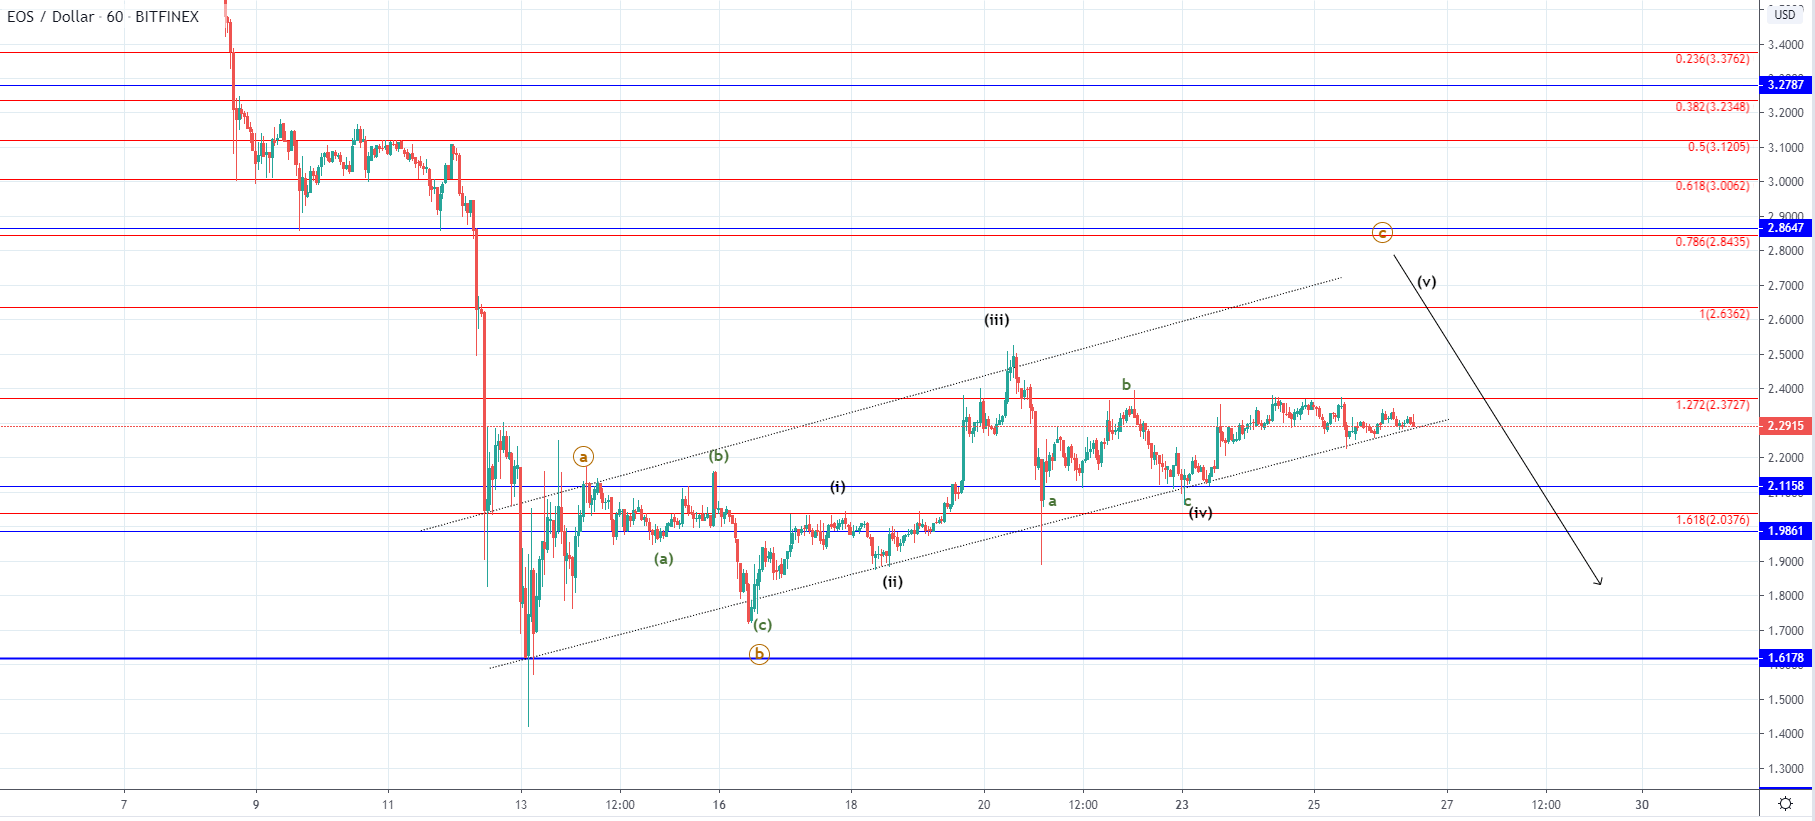 LTC and EOS - Sideways movement seen but another increase expected